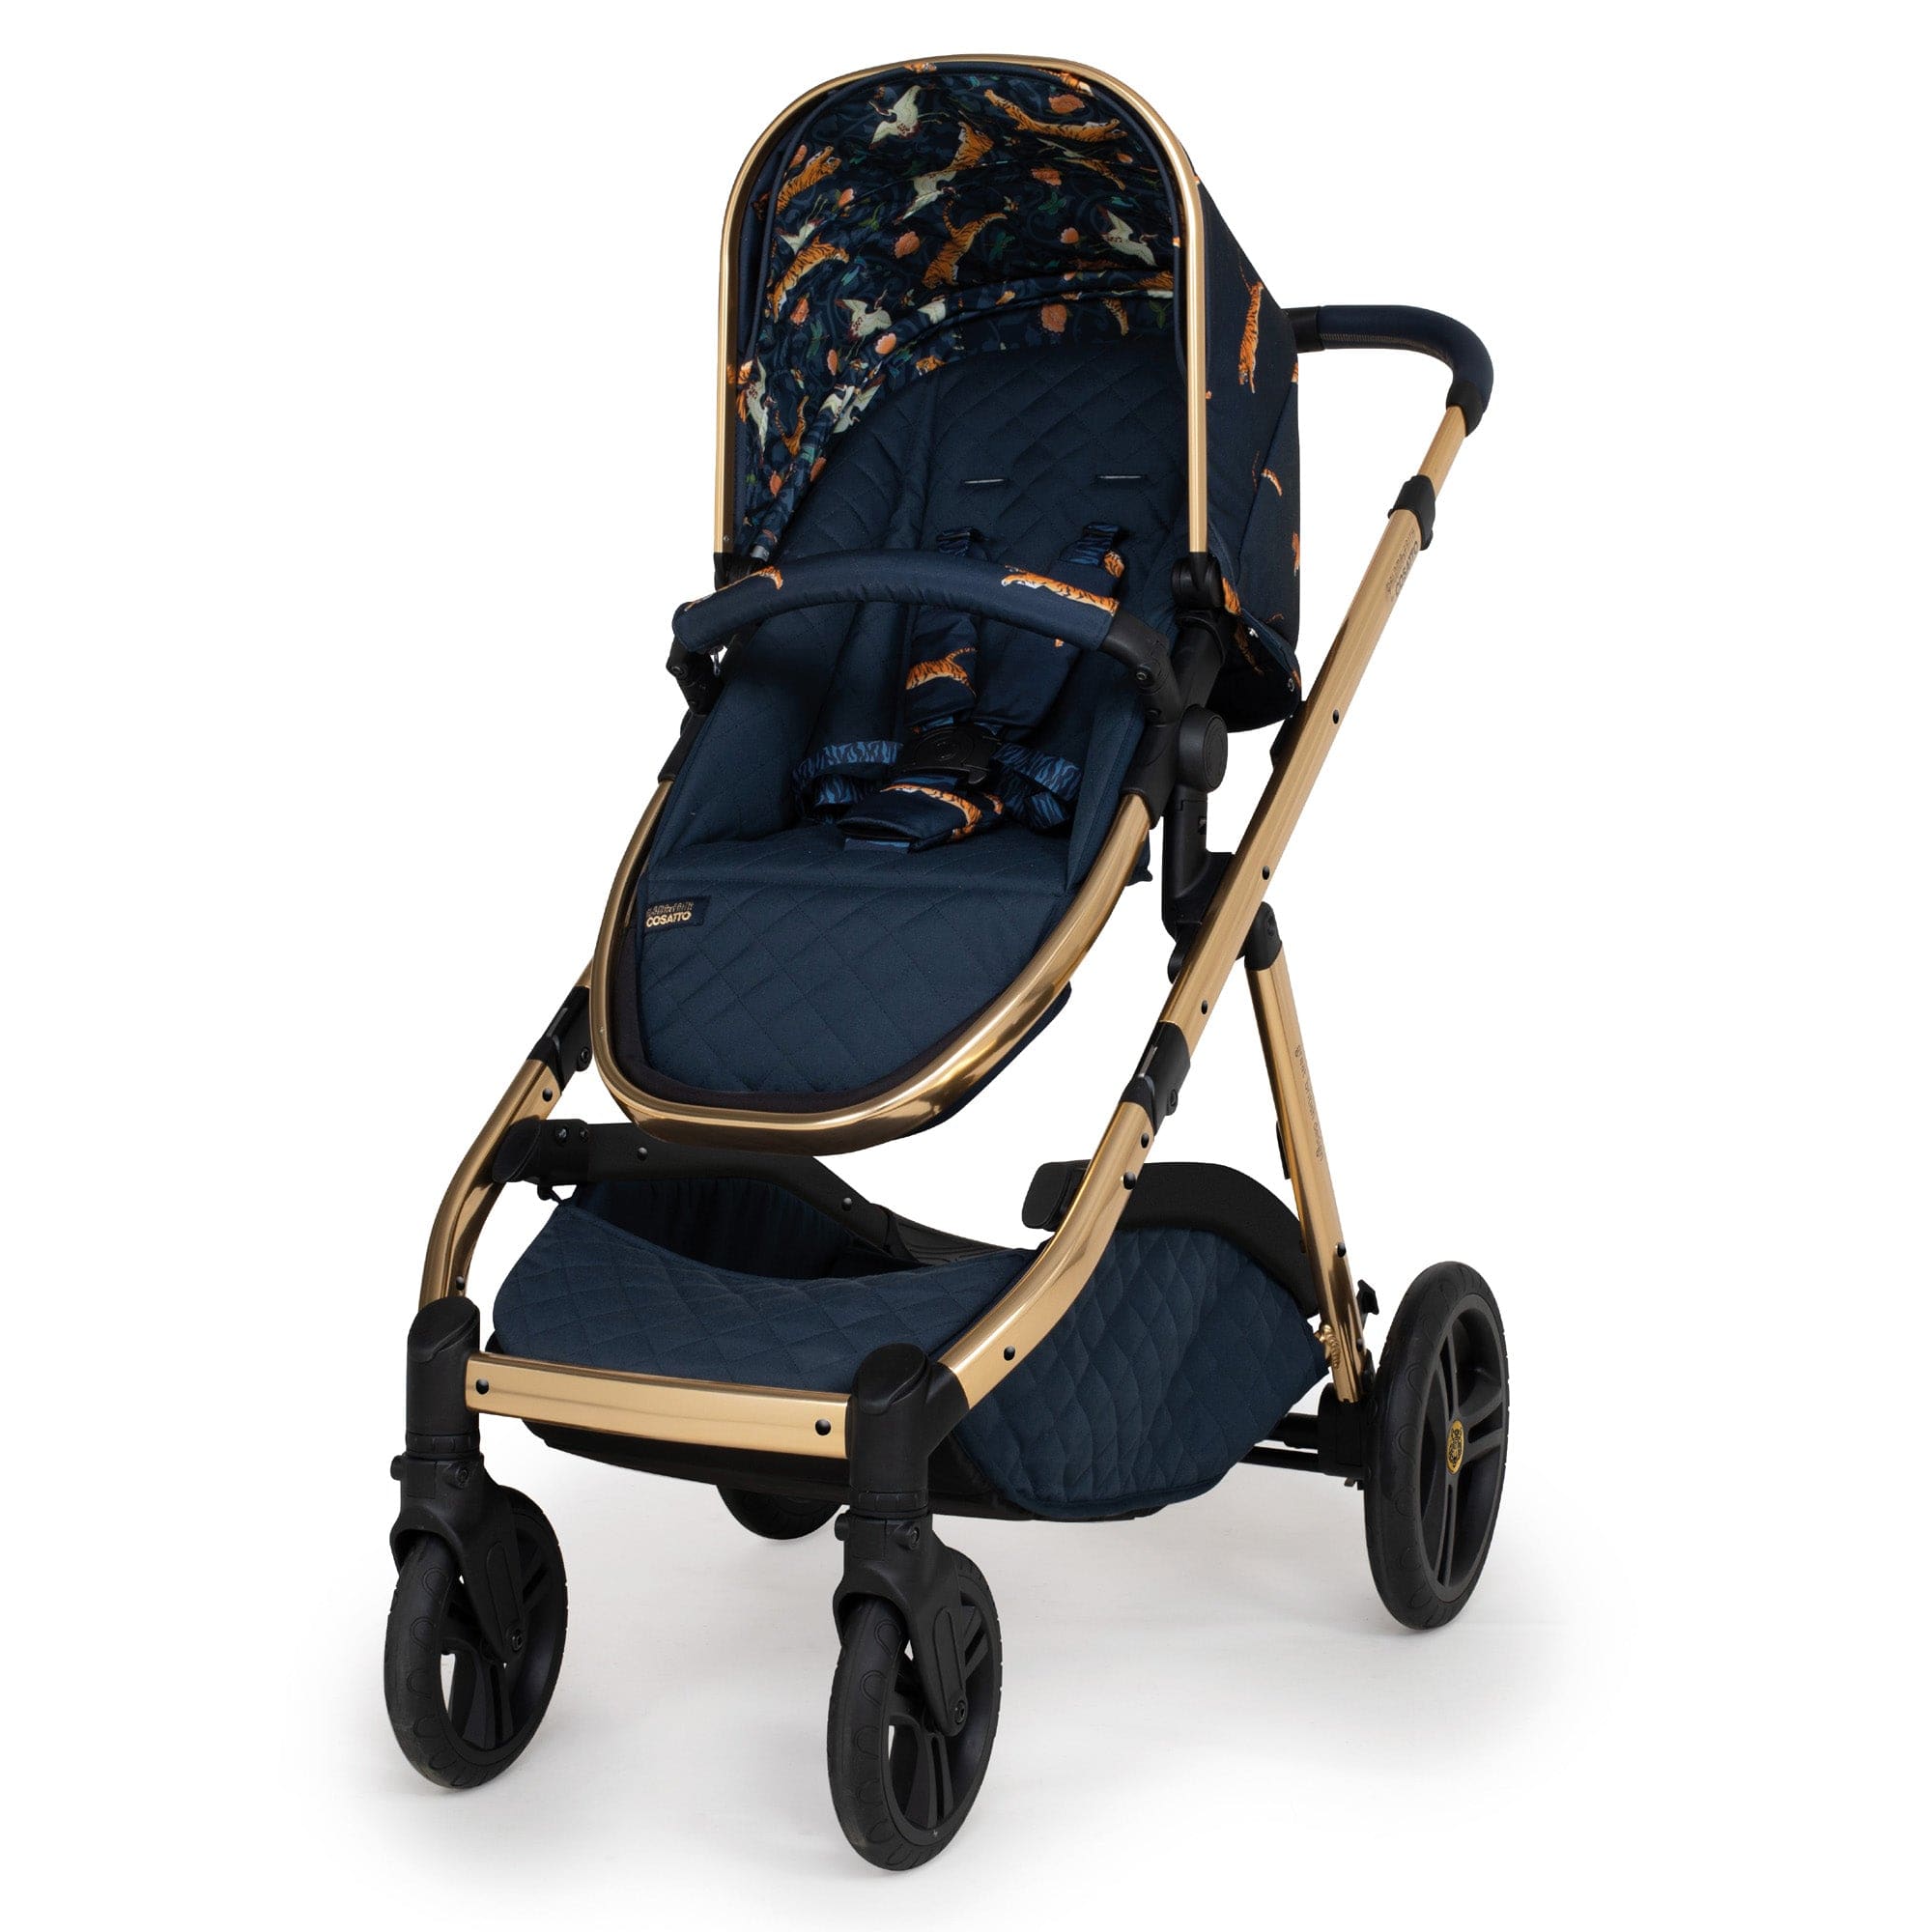 Cosatto Wow XL Pram & Accessories On The Prowl Pushchairs & Buggies CT5206 5021645066416